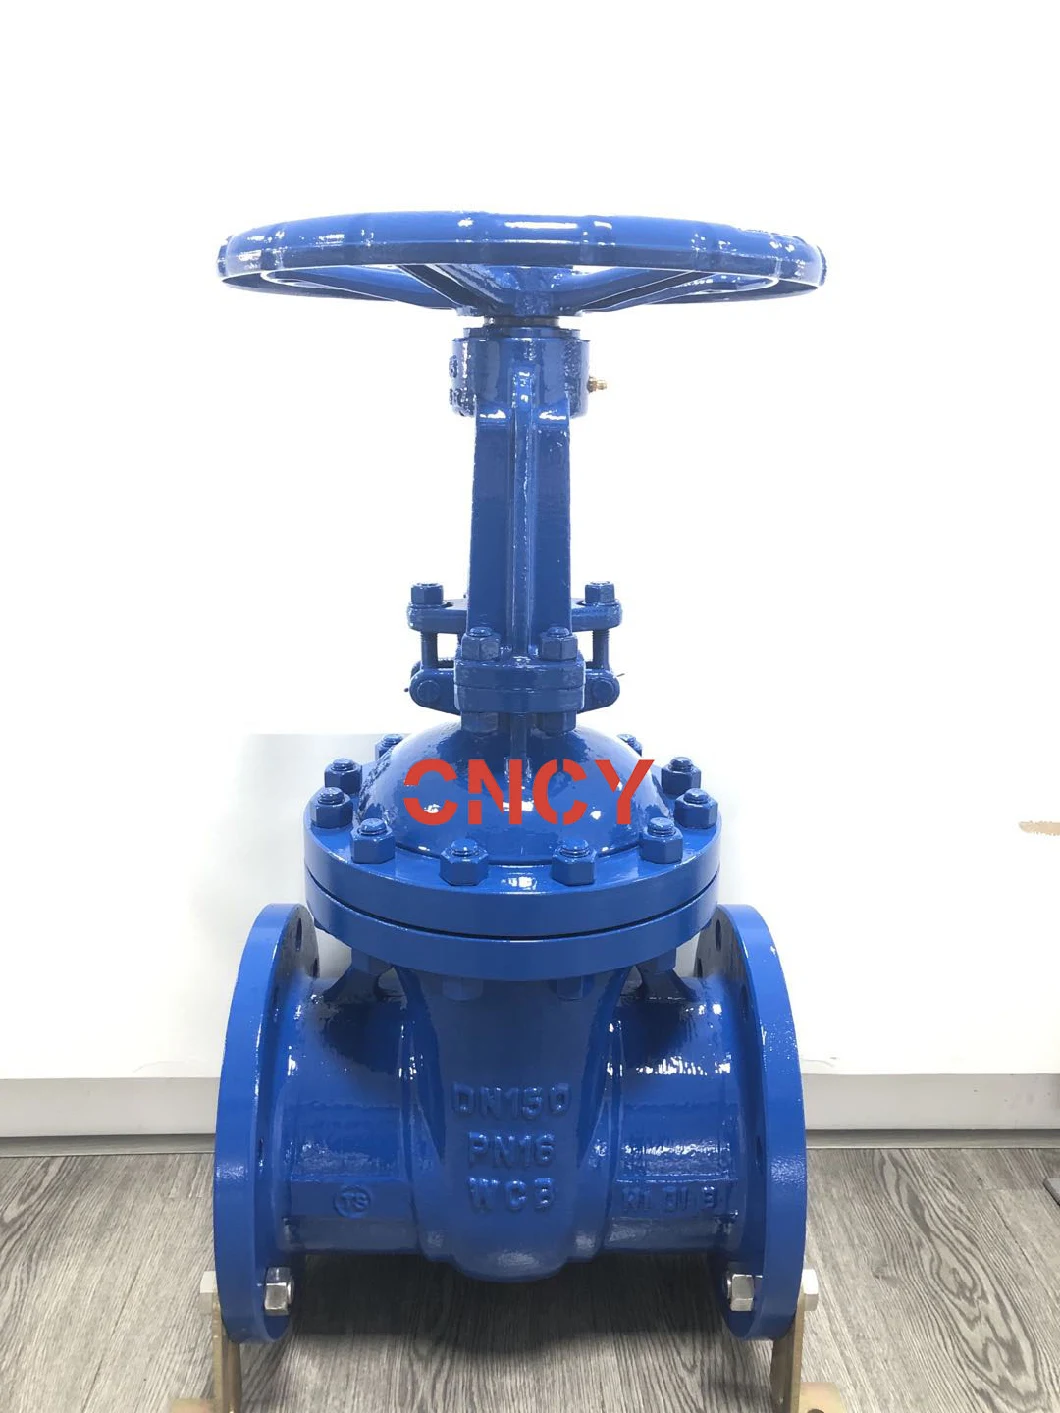 DIN Wcb Rising Stem Gate Valve Manufacturer and Trading Company